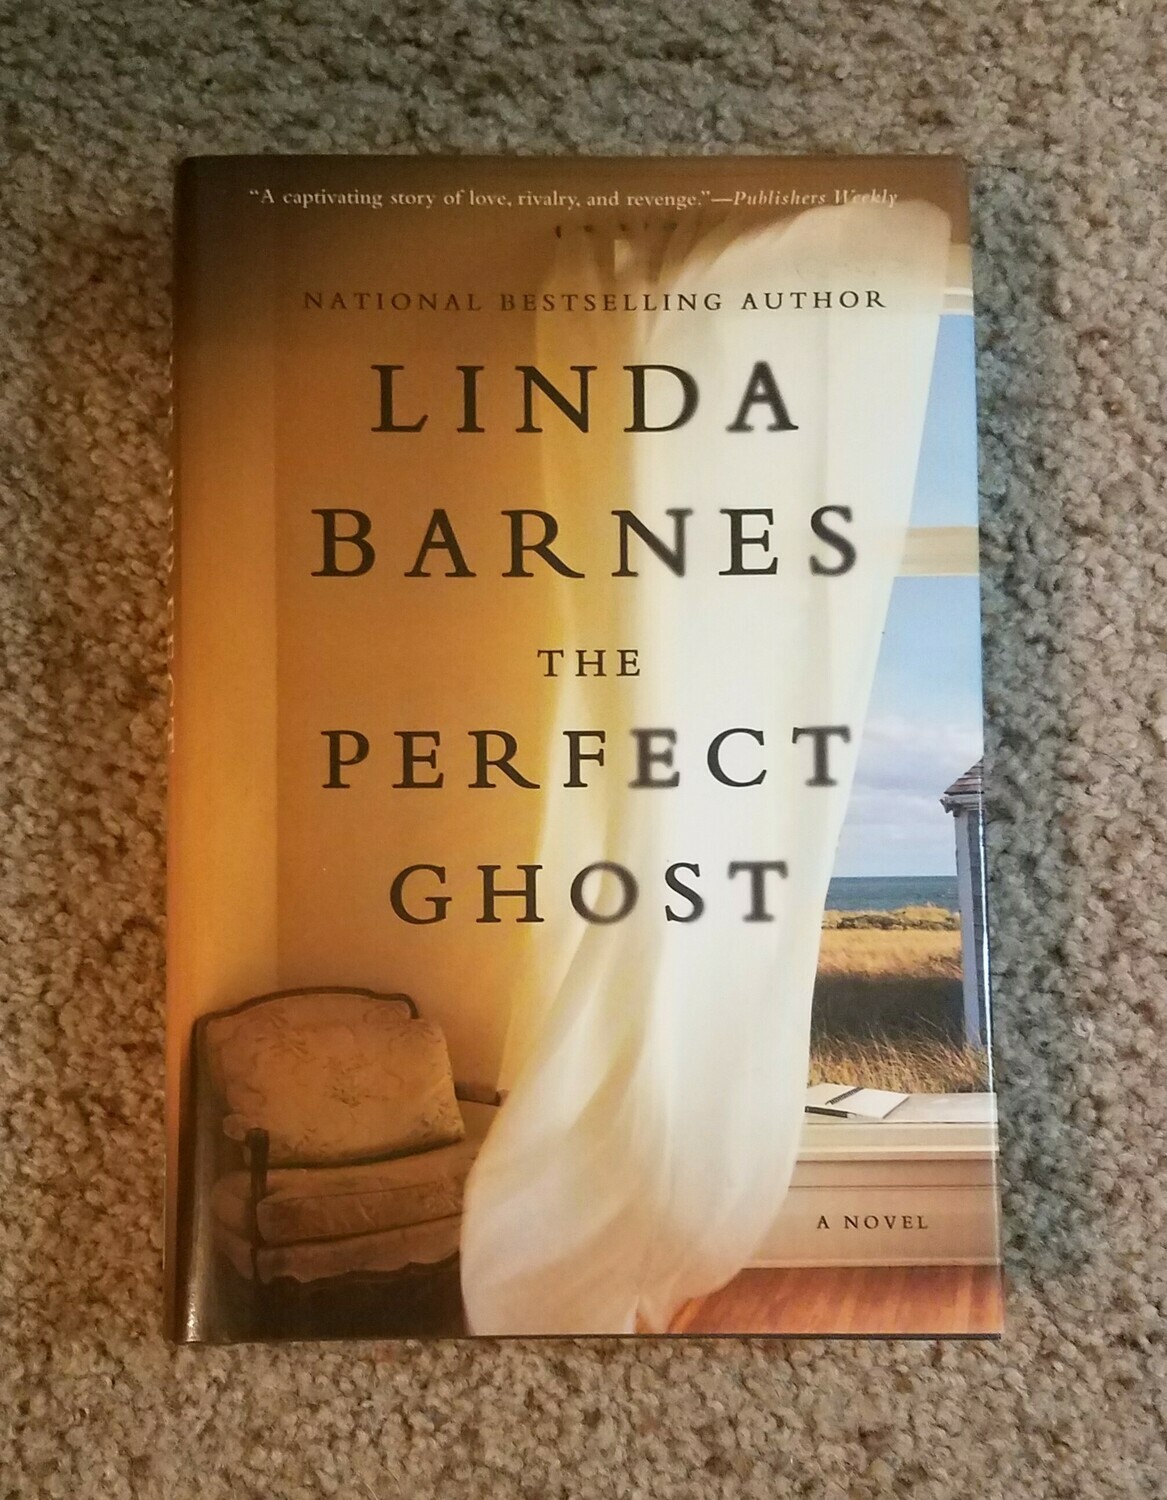 The Perfect Ghost by Linda Barnes